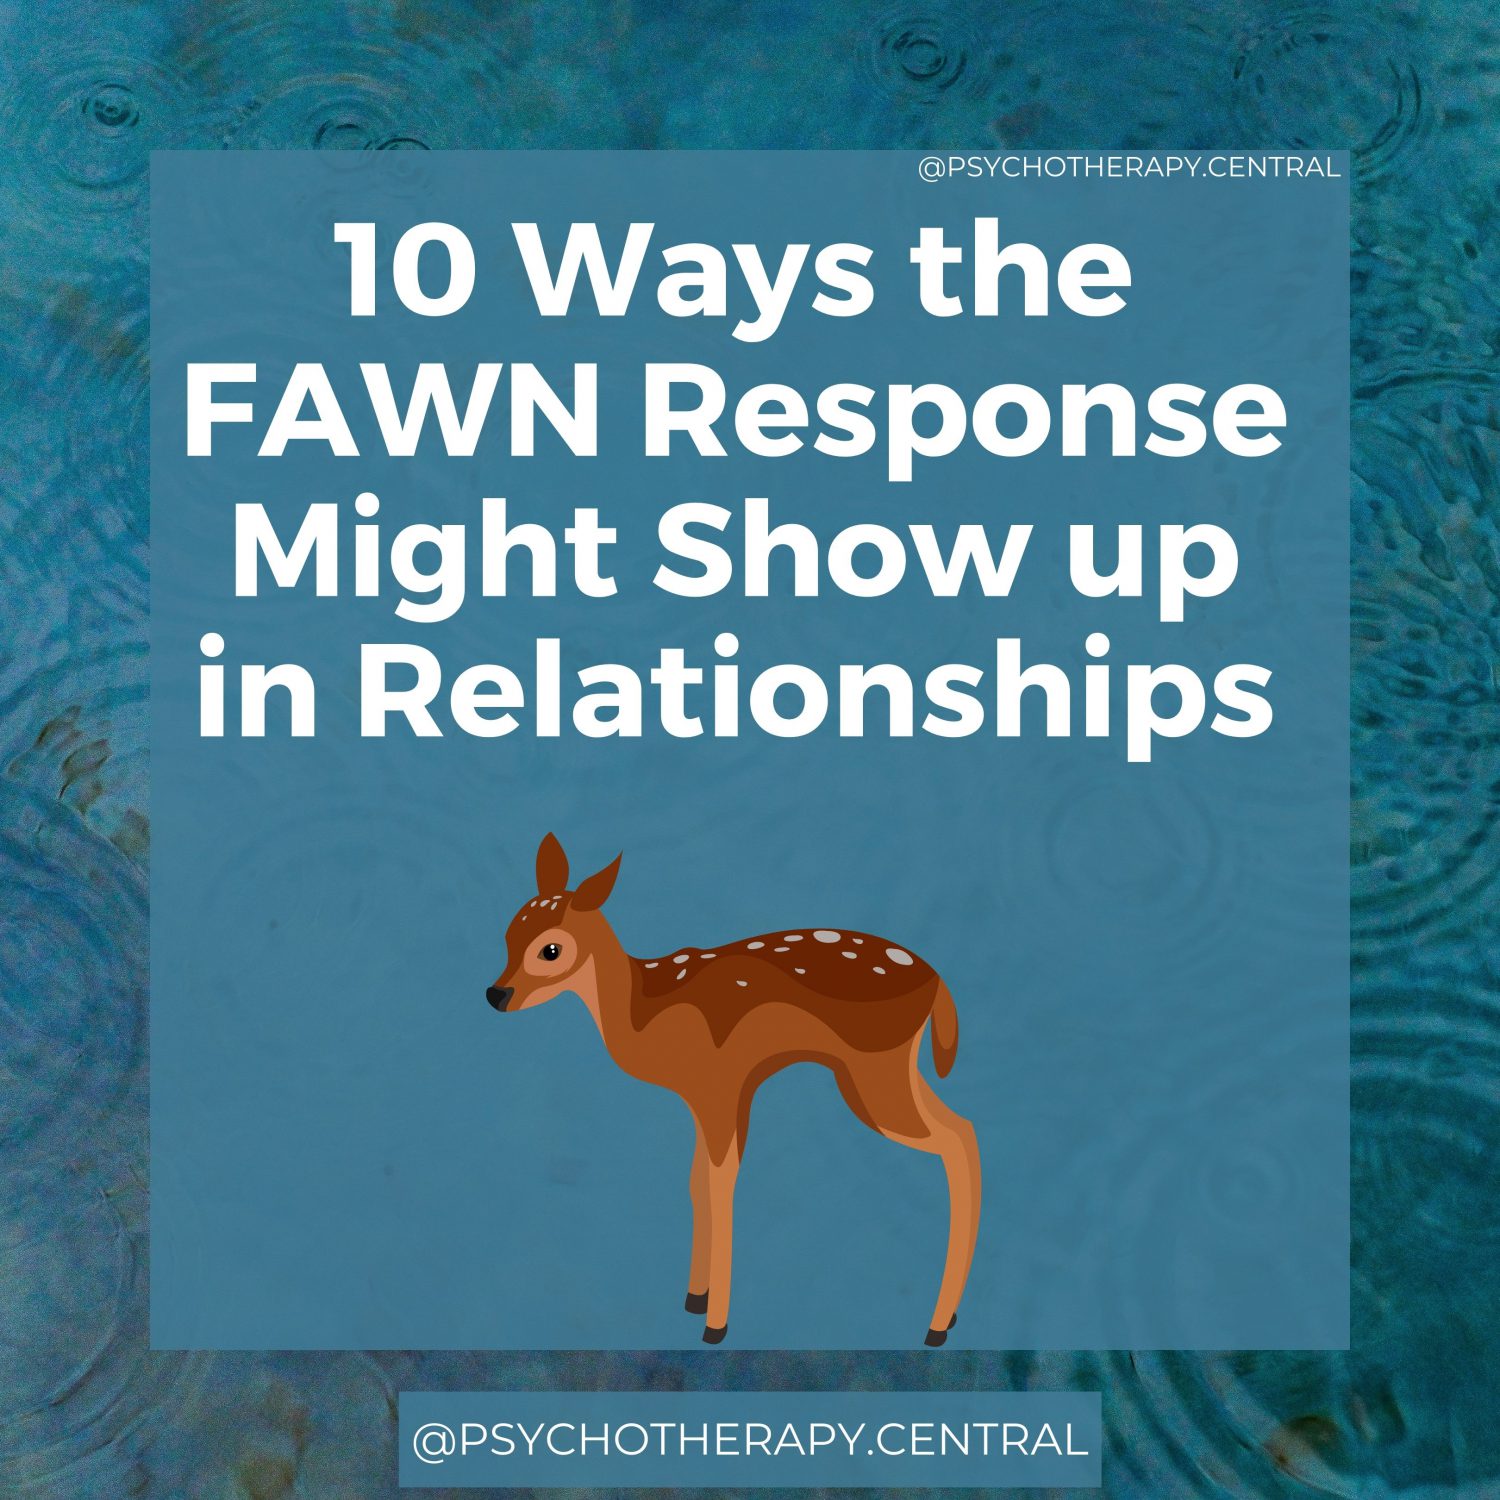 10 Ways the FAWN Response Might Show up in Relationships